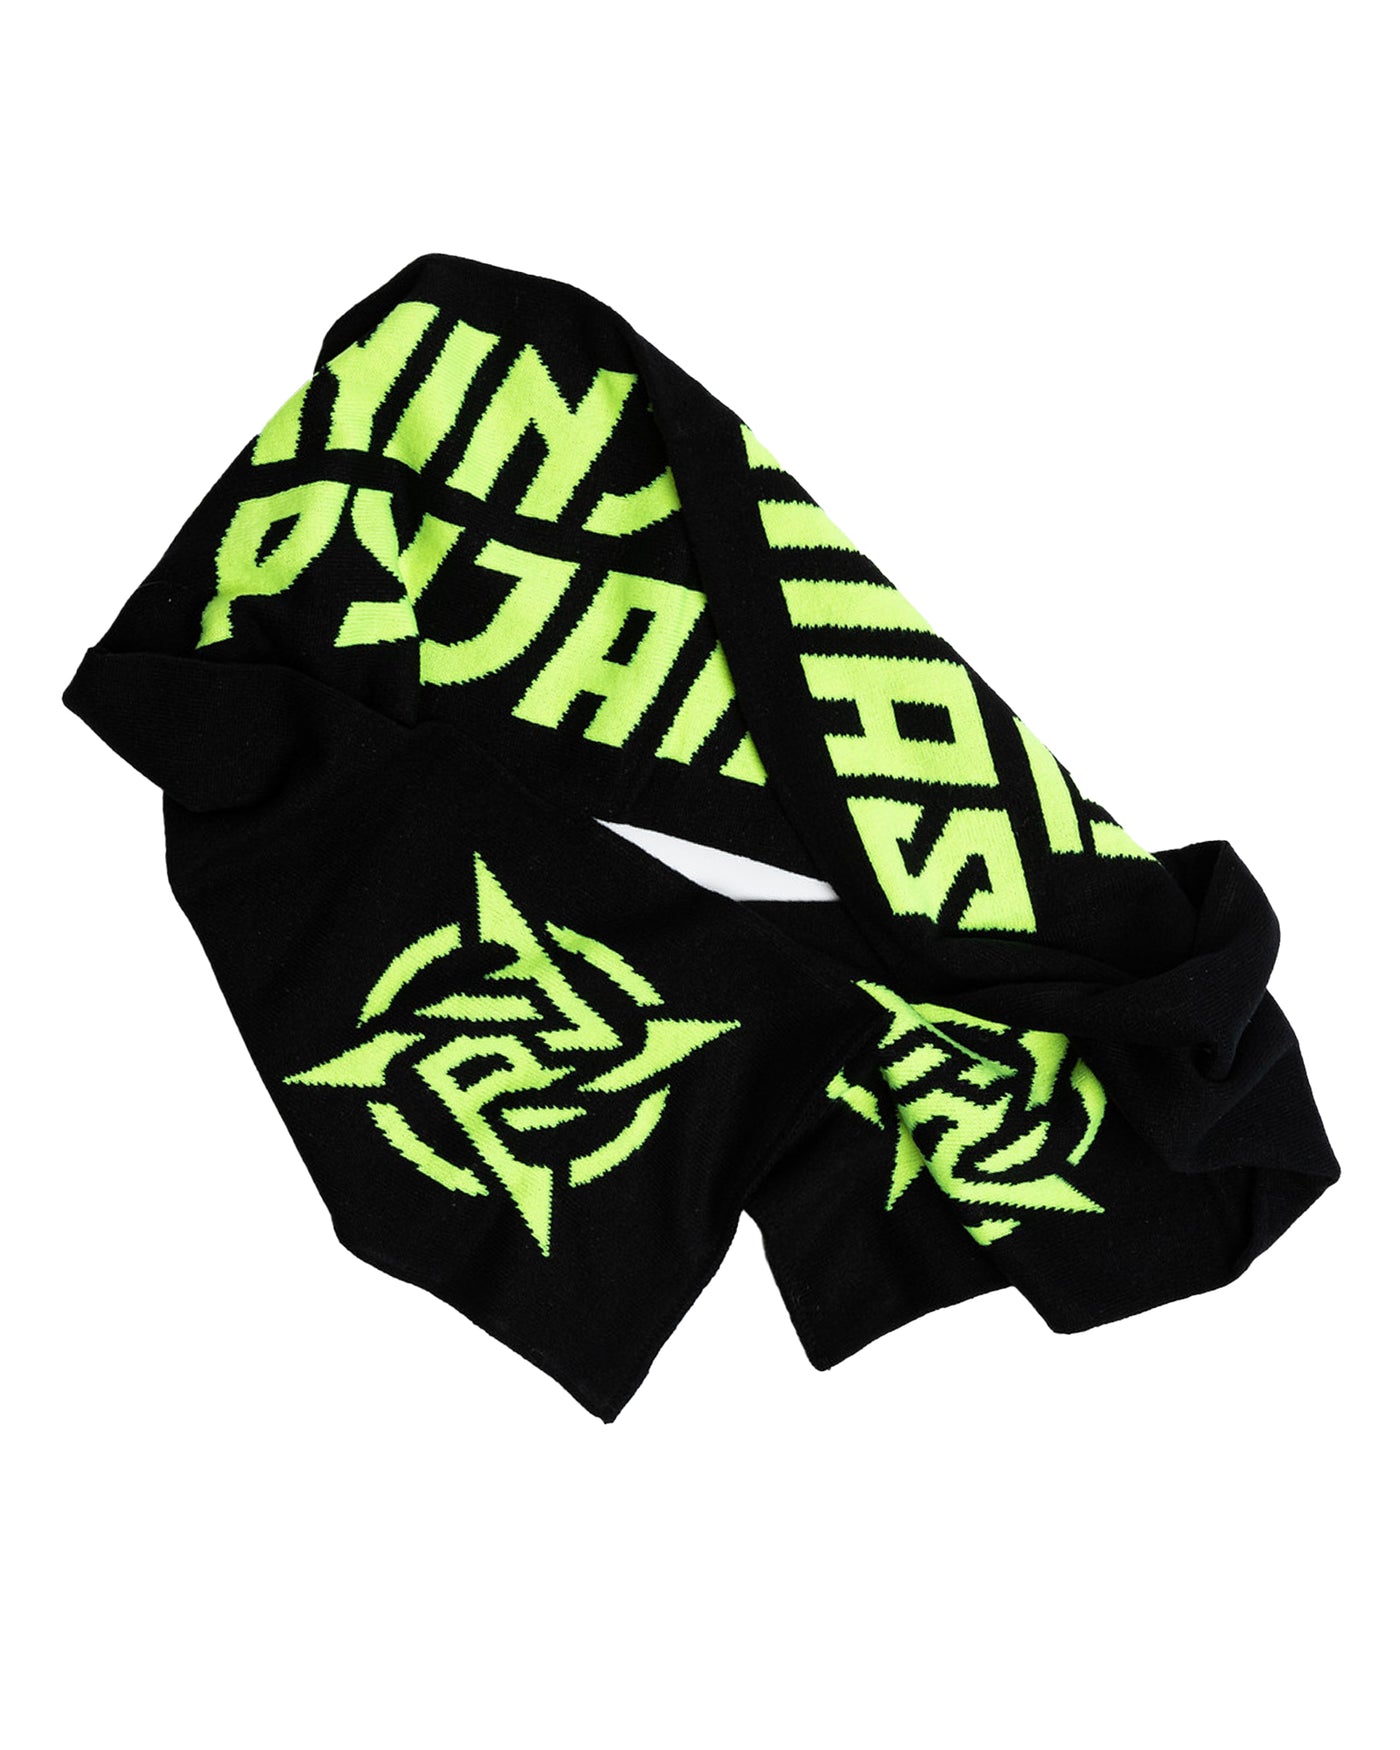 A stylish supporter scarf from merch collection, adorned with the Ninjas in Pyjamas logo and team name. This high-quality scarf is perfect for showcasing your allegiance to NIP during matches and events, while also providing warmth and comfort.